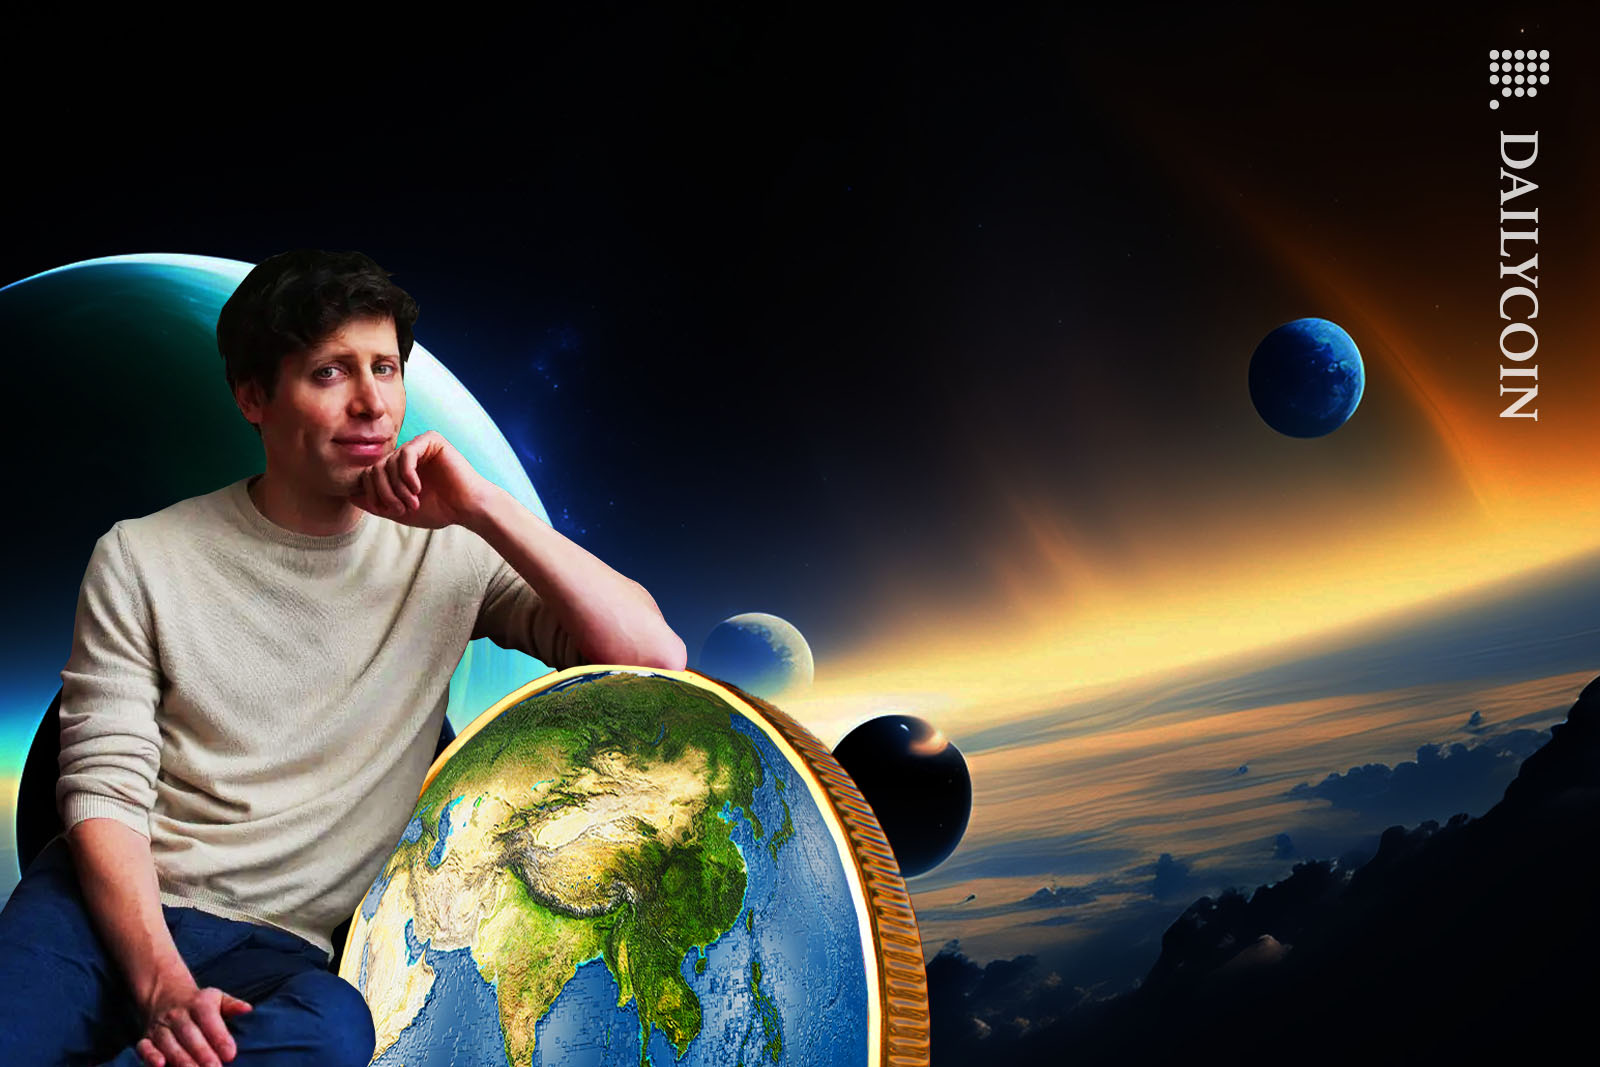 Sam Altman smiling in outter space, next to a worldcoin.